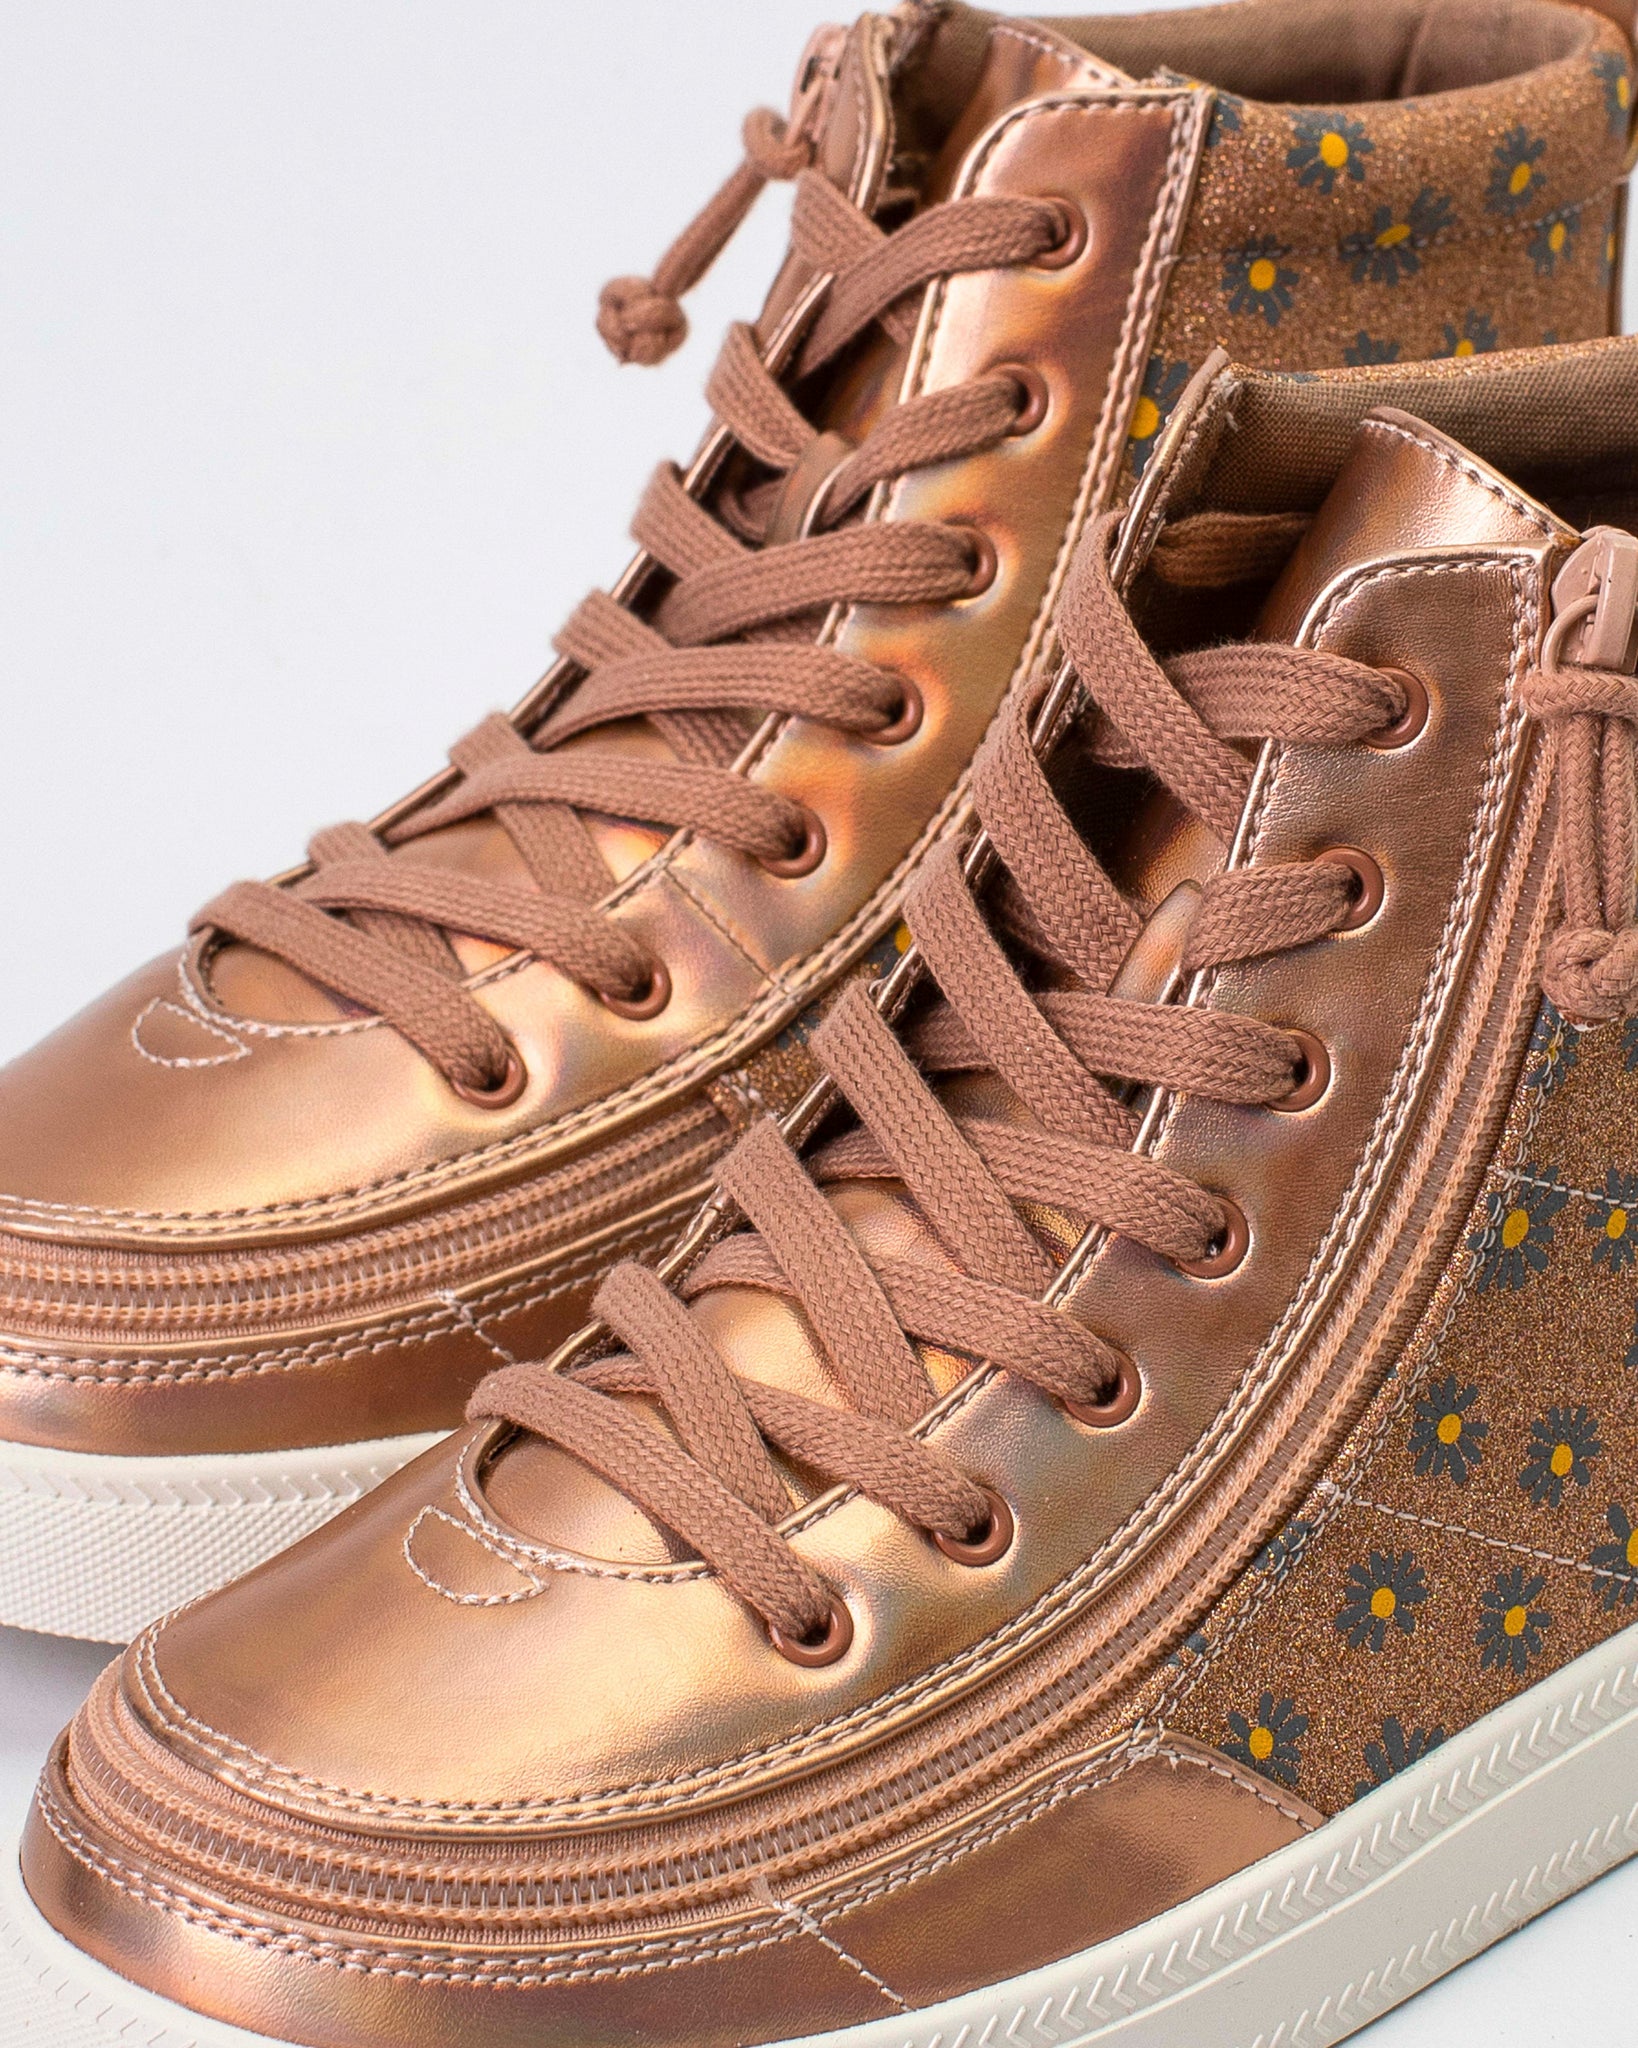 Classic High Top (Kids) - Rose Gold Daisy